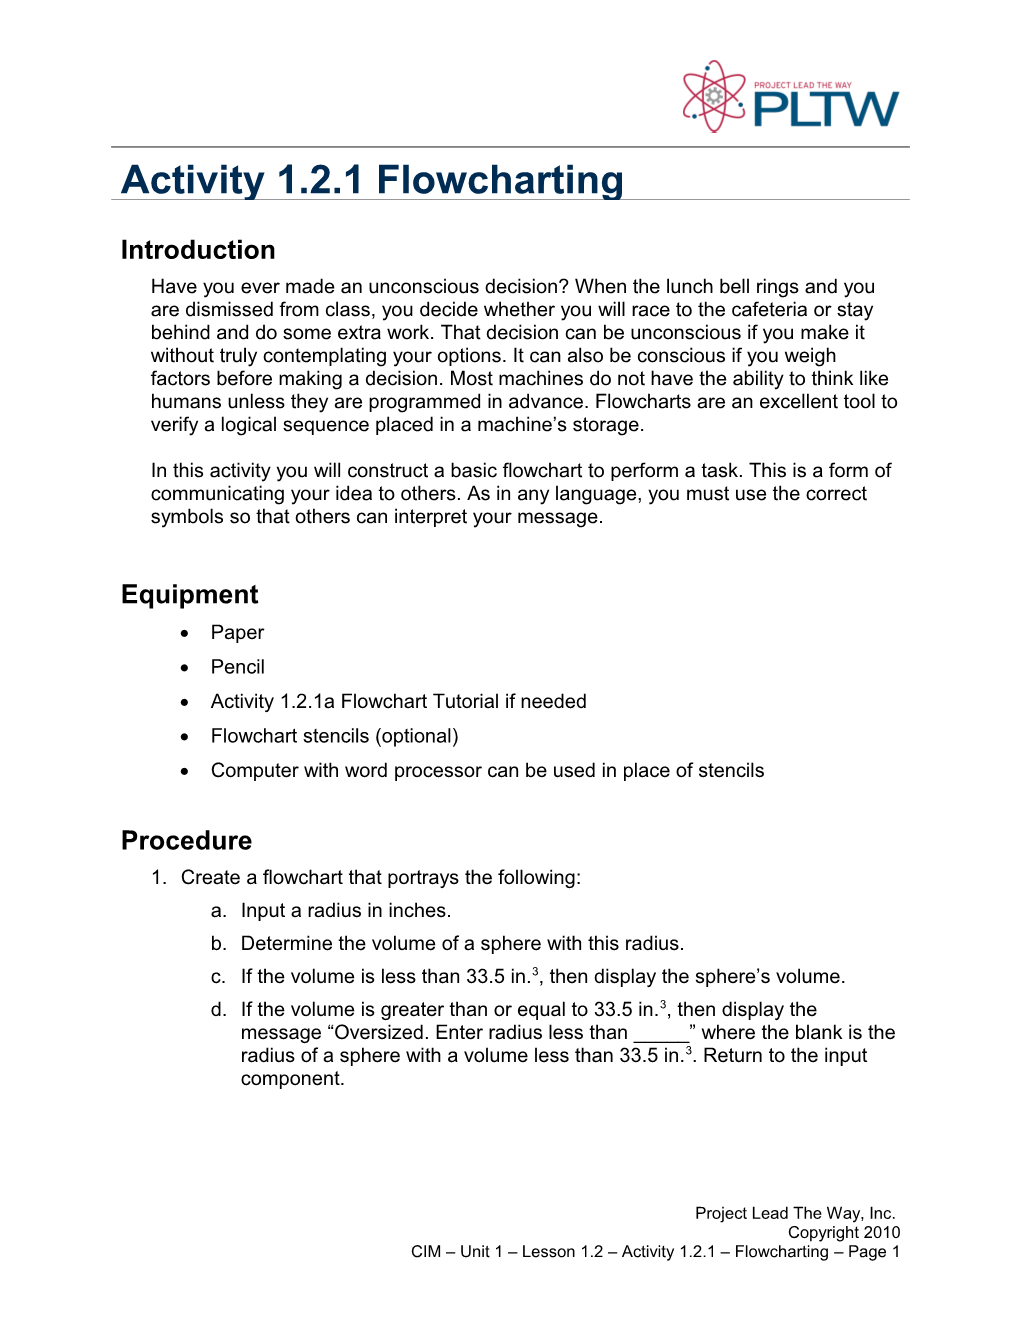 Activity 1.2.1 Flowcharting Introduction